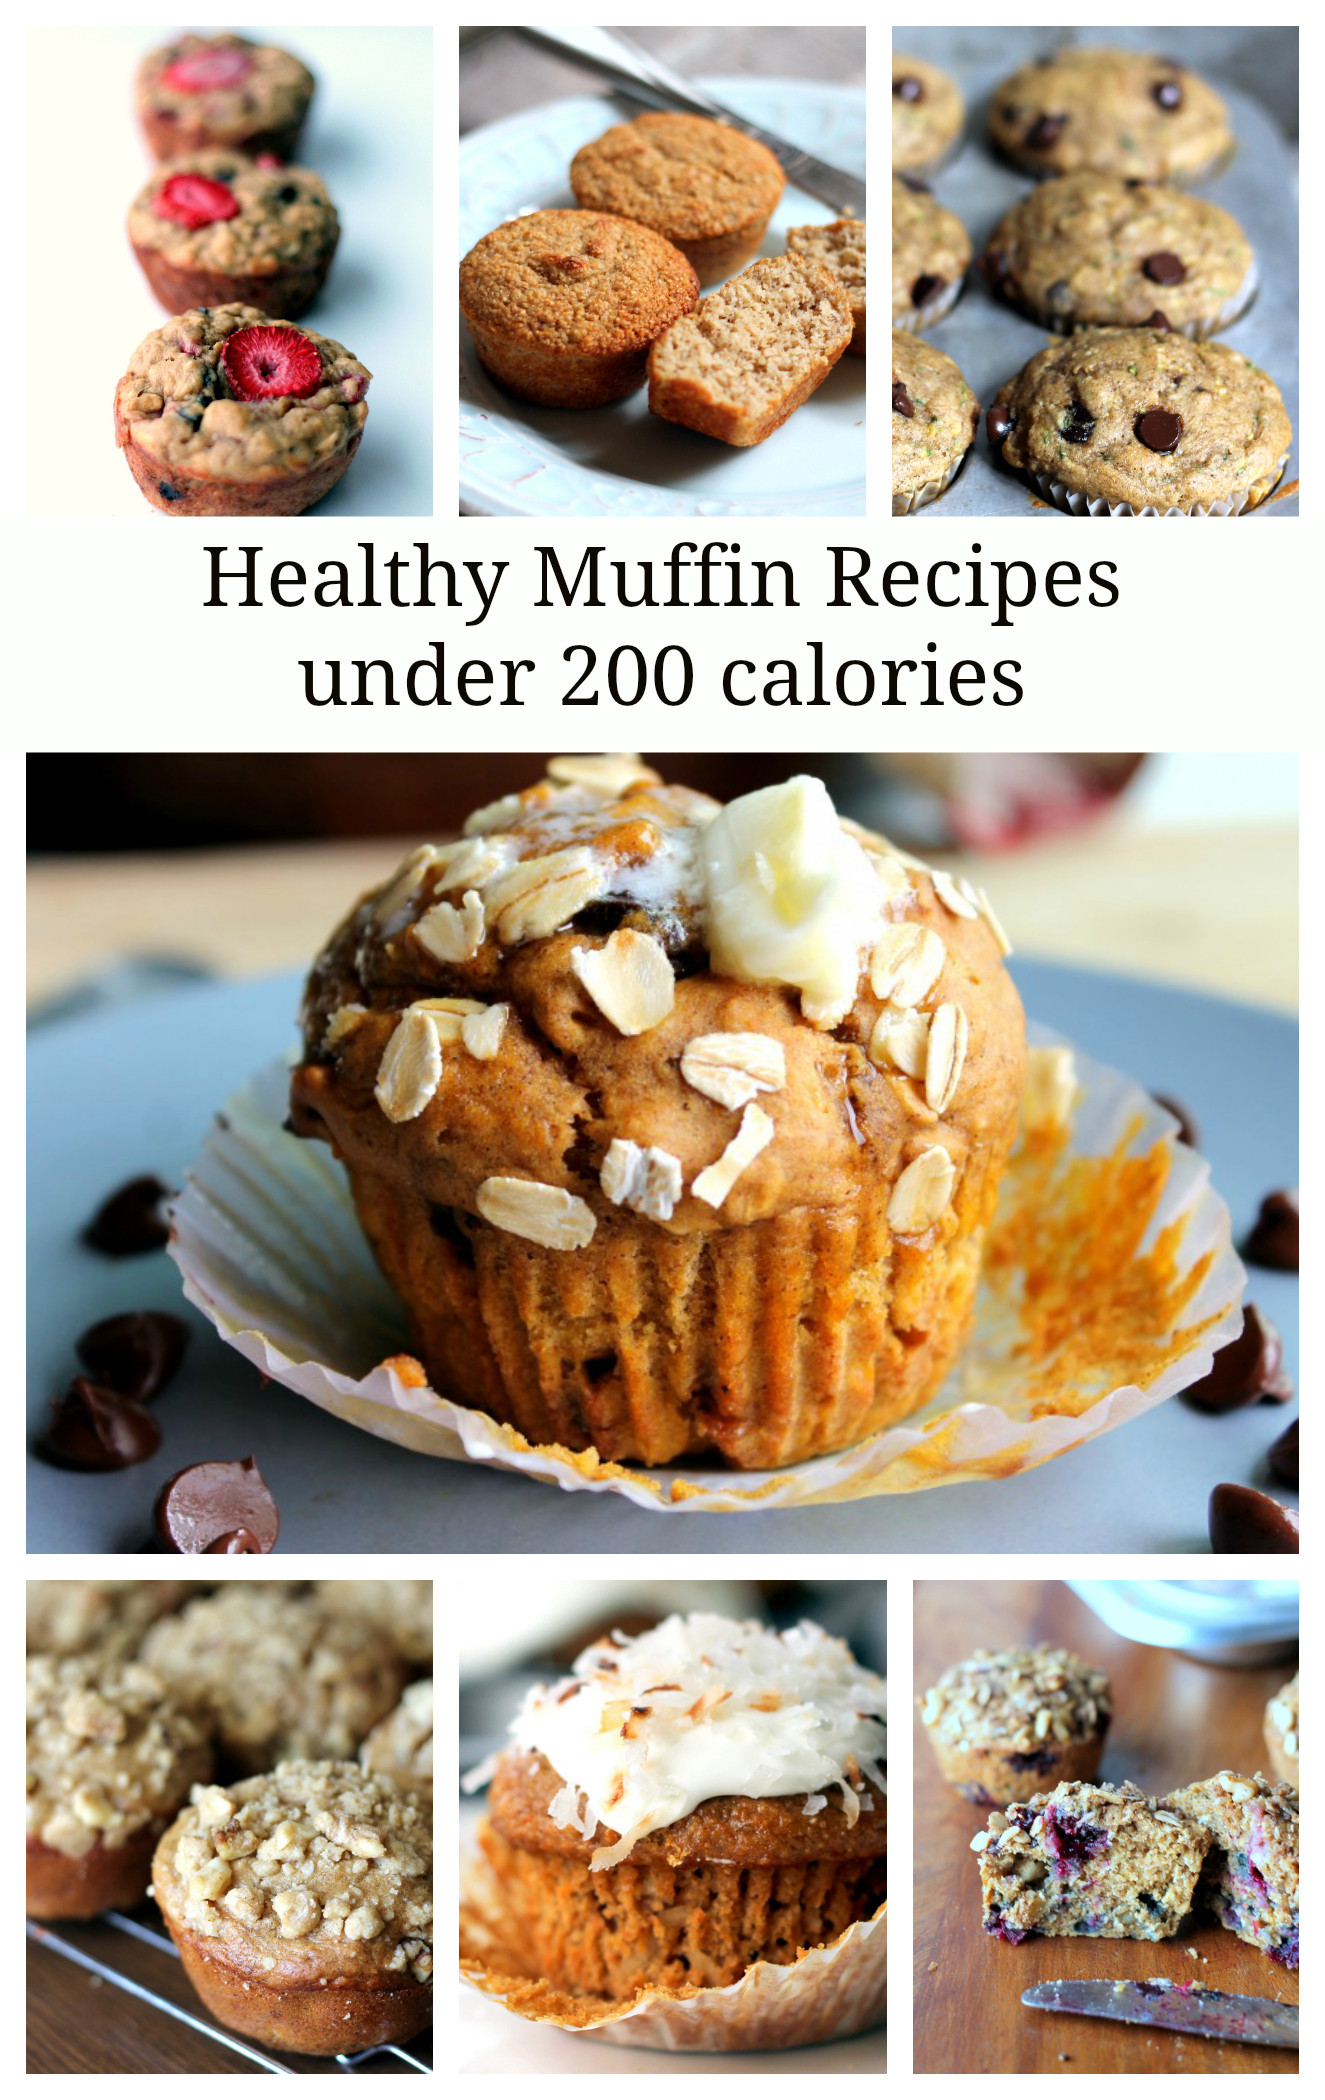 Healthy Breakfast Muffins Low Calorie
 7 Healthy Muffin Recipes Under 200 Calories